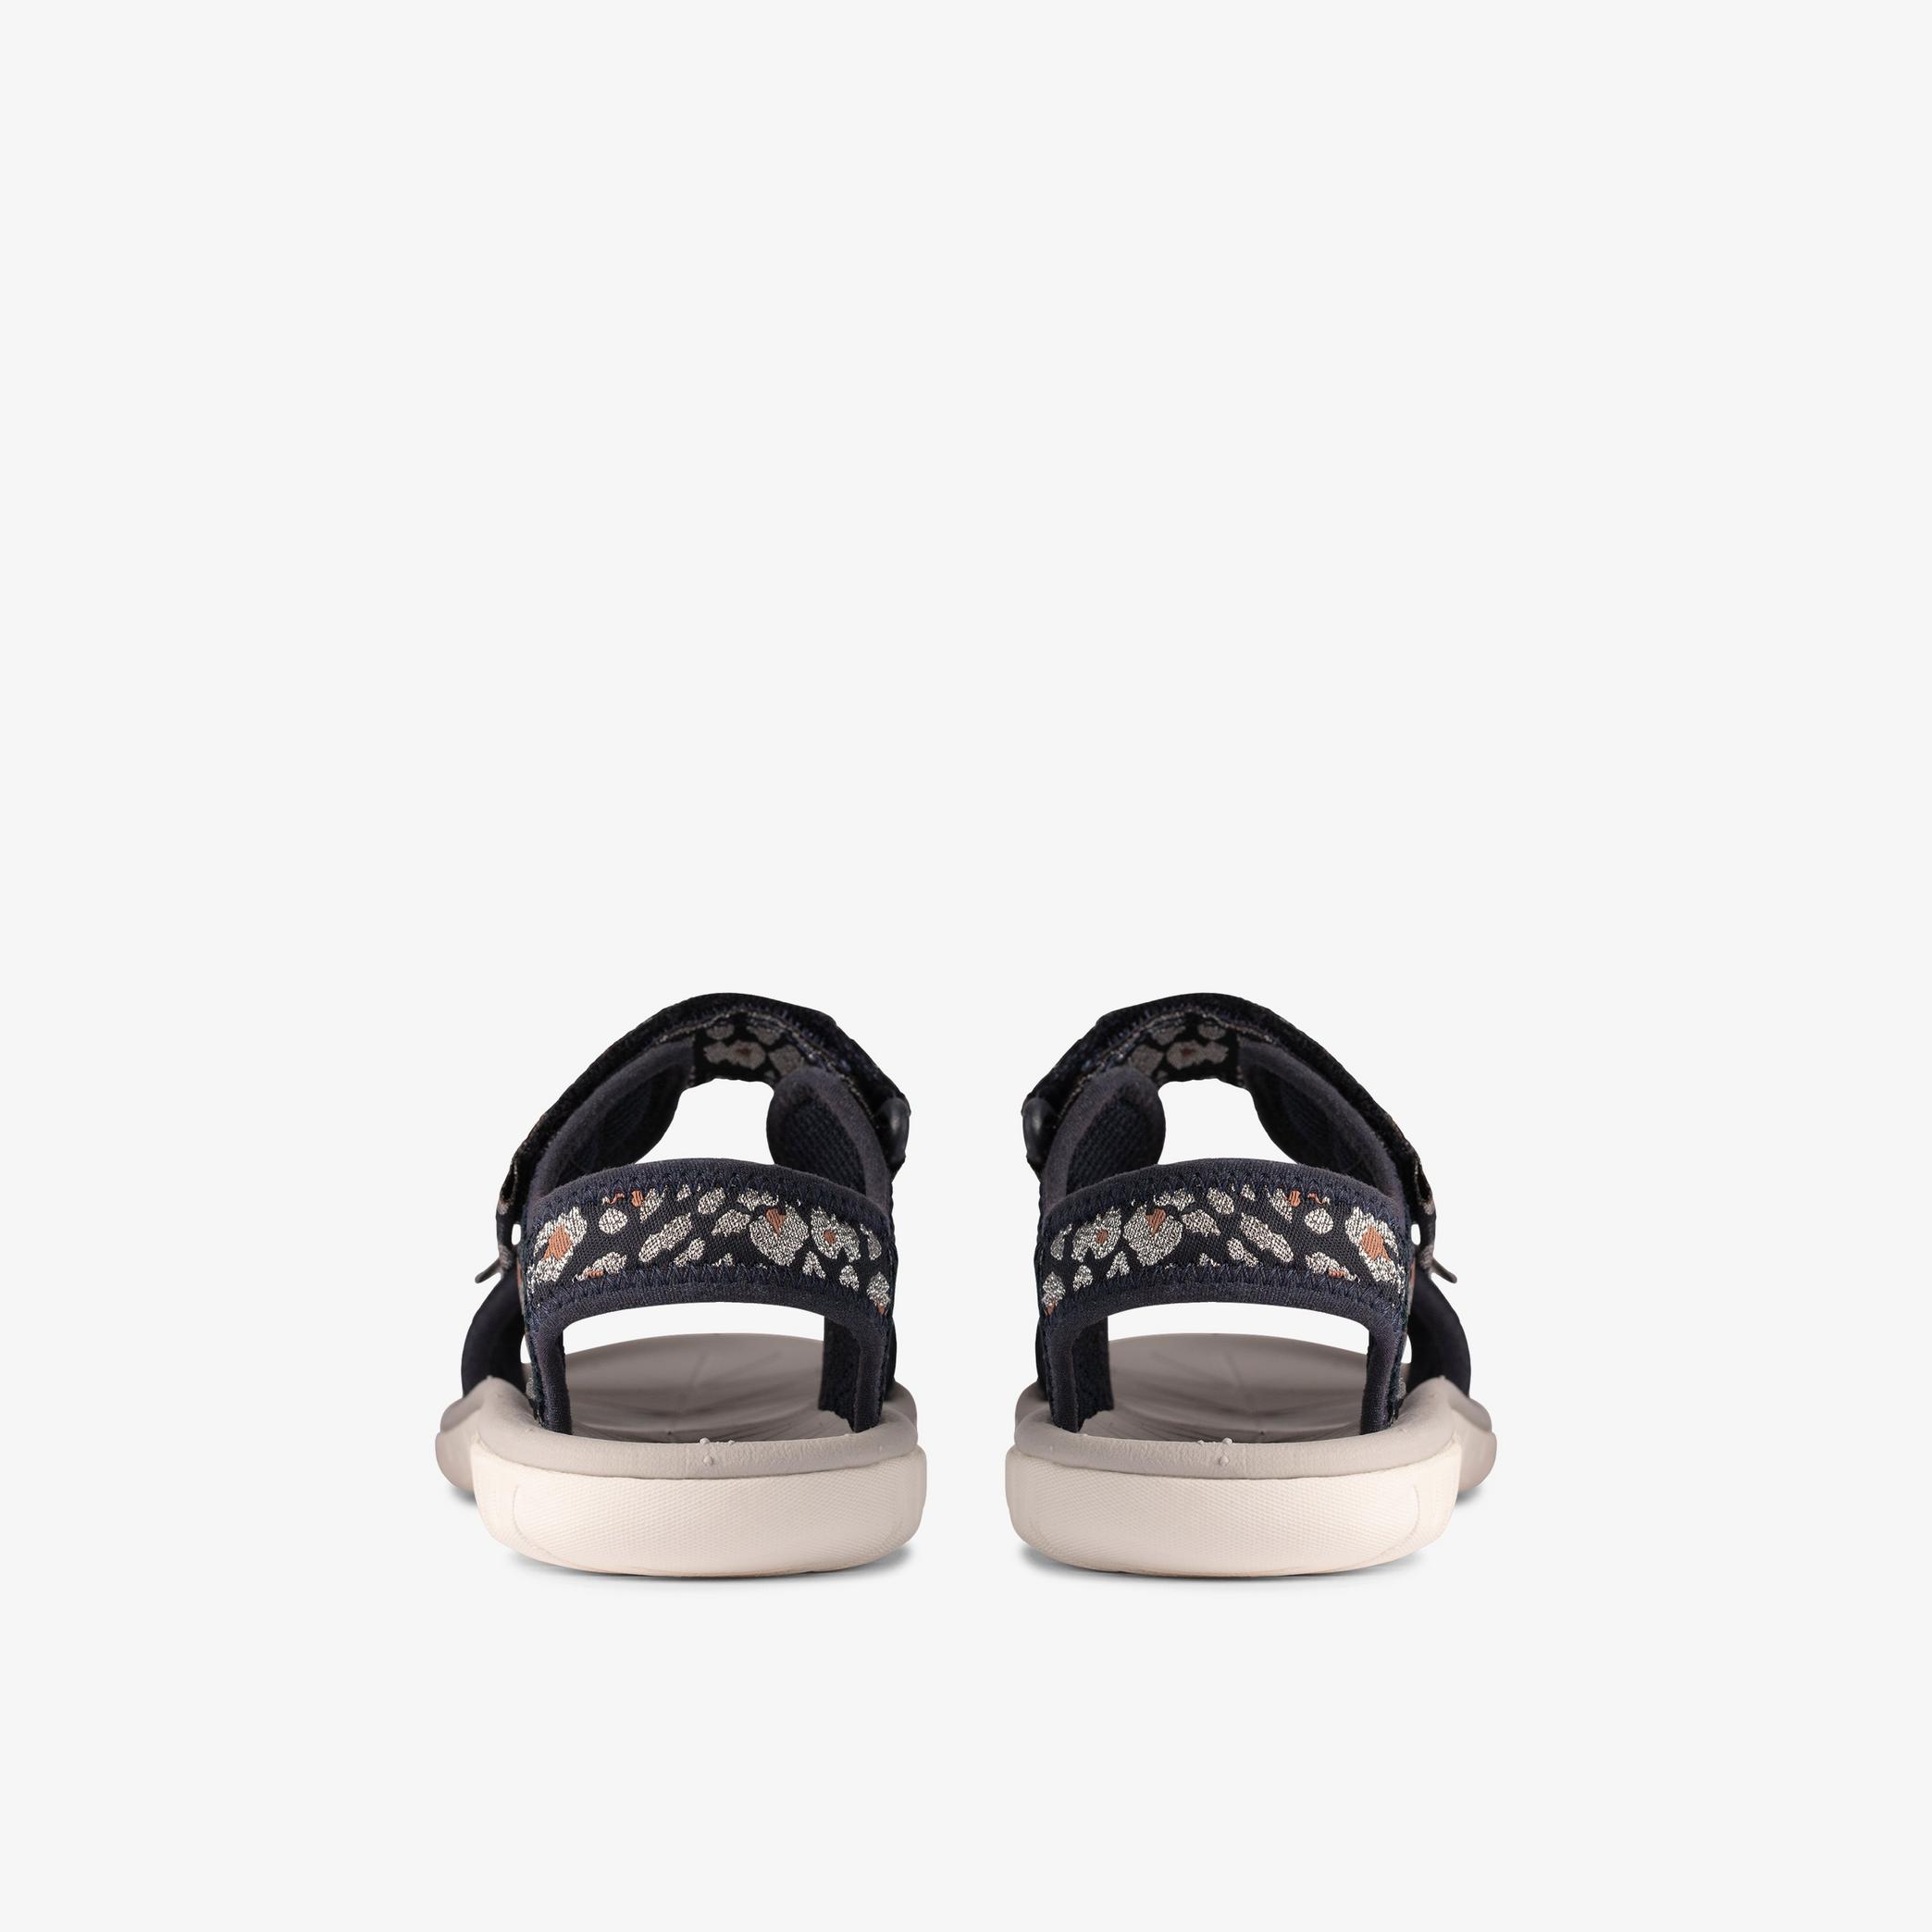 SurfingTide Toddler Navy Combination Flat Sandals, view 5 of 6